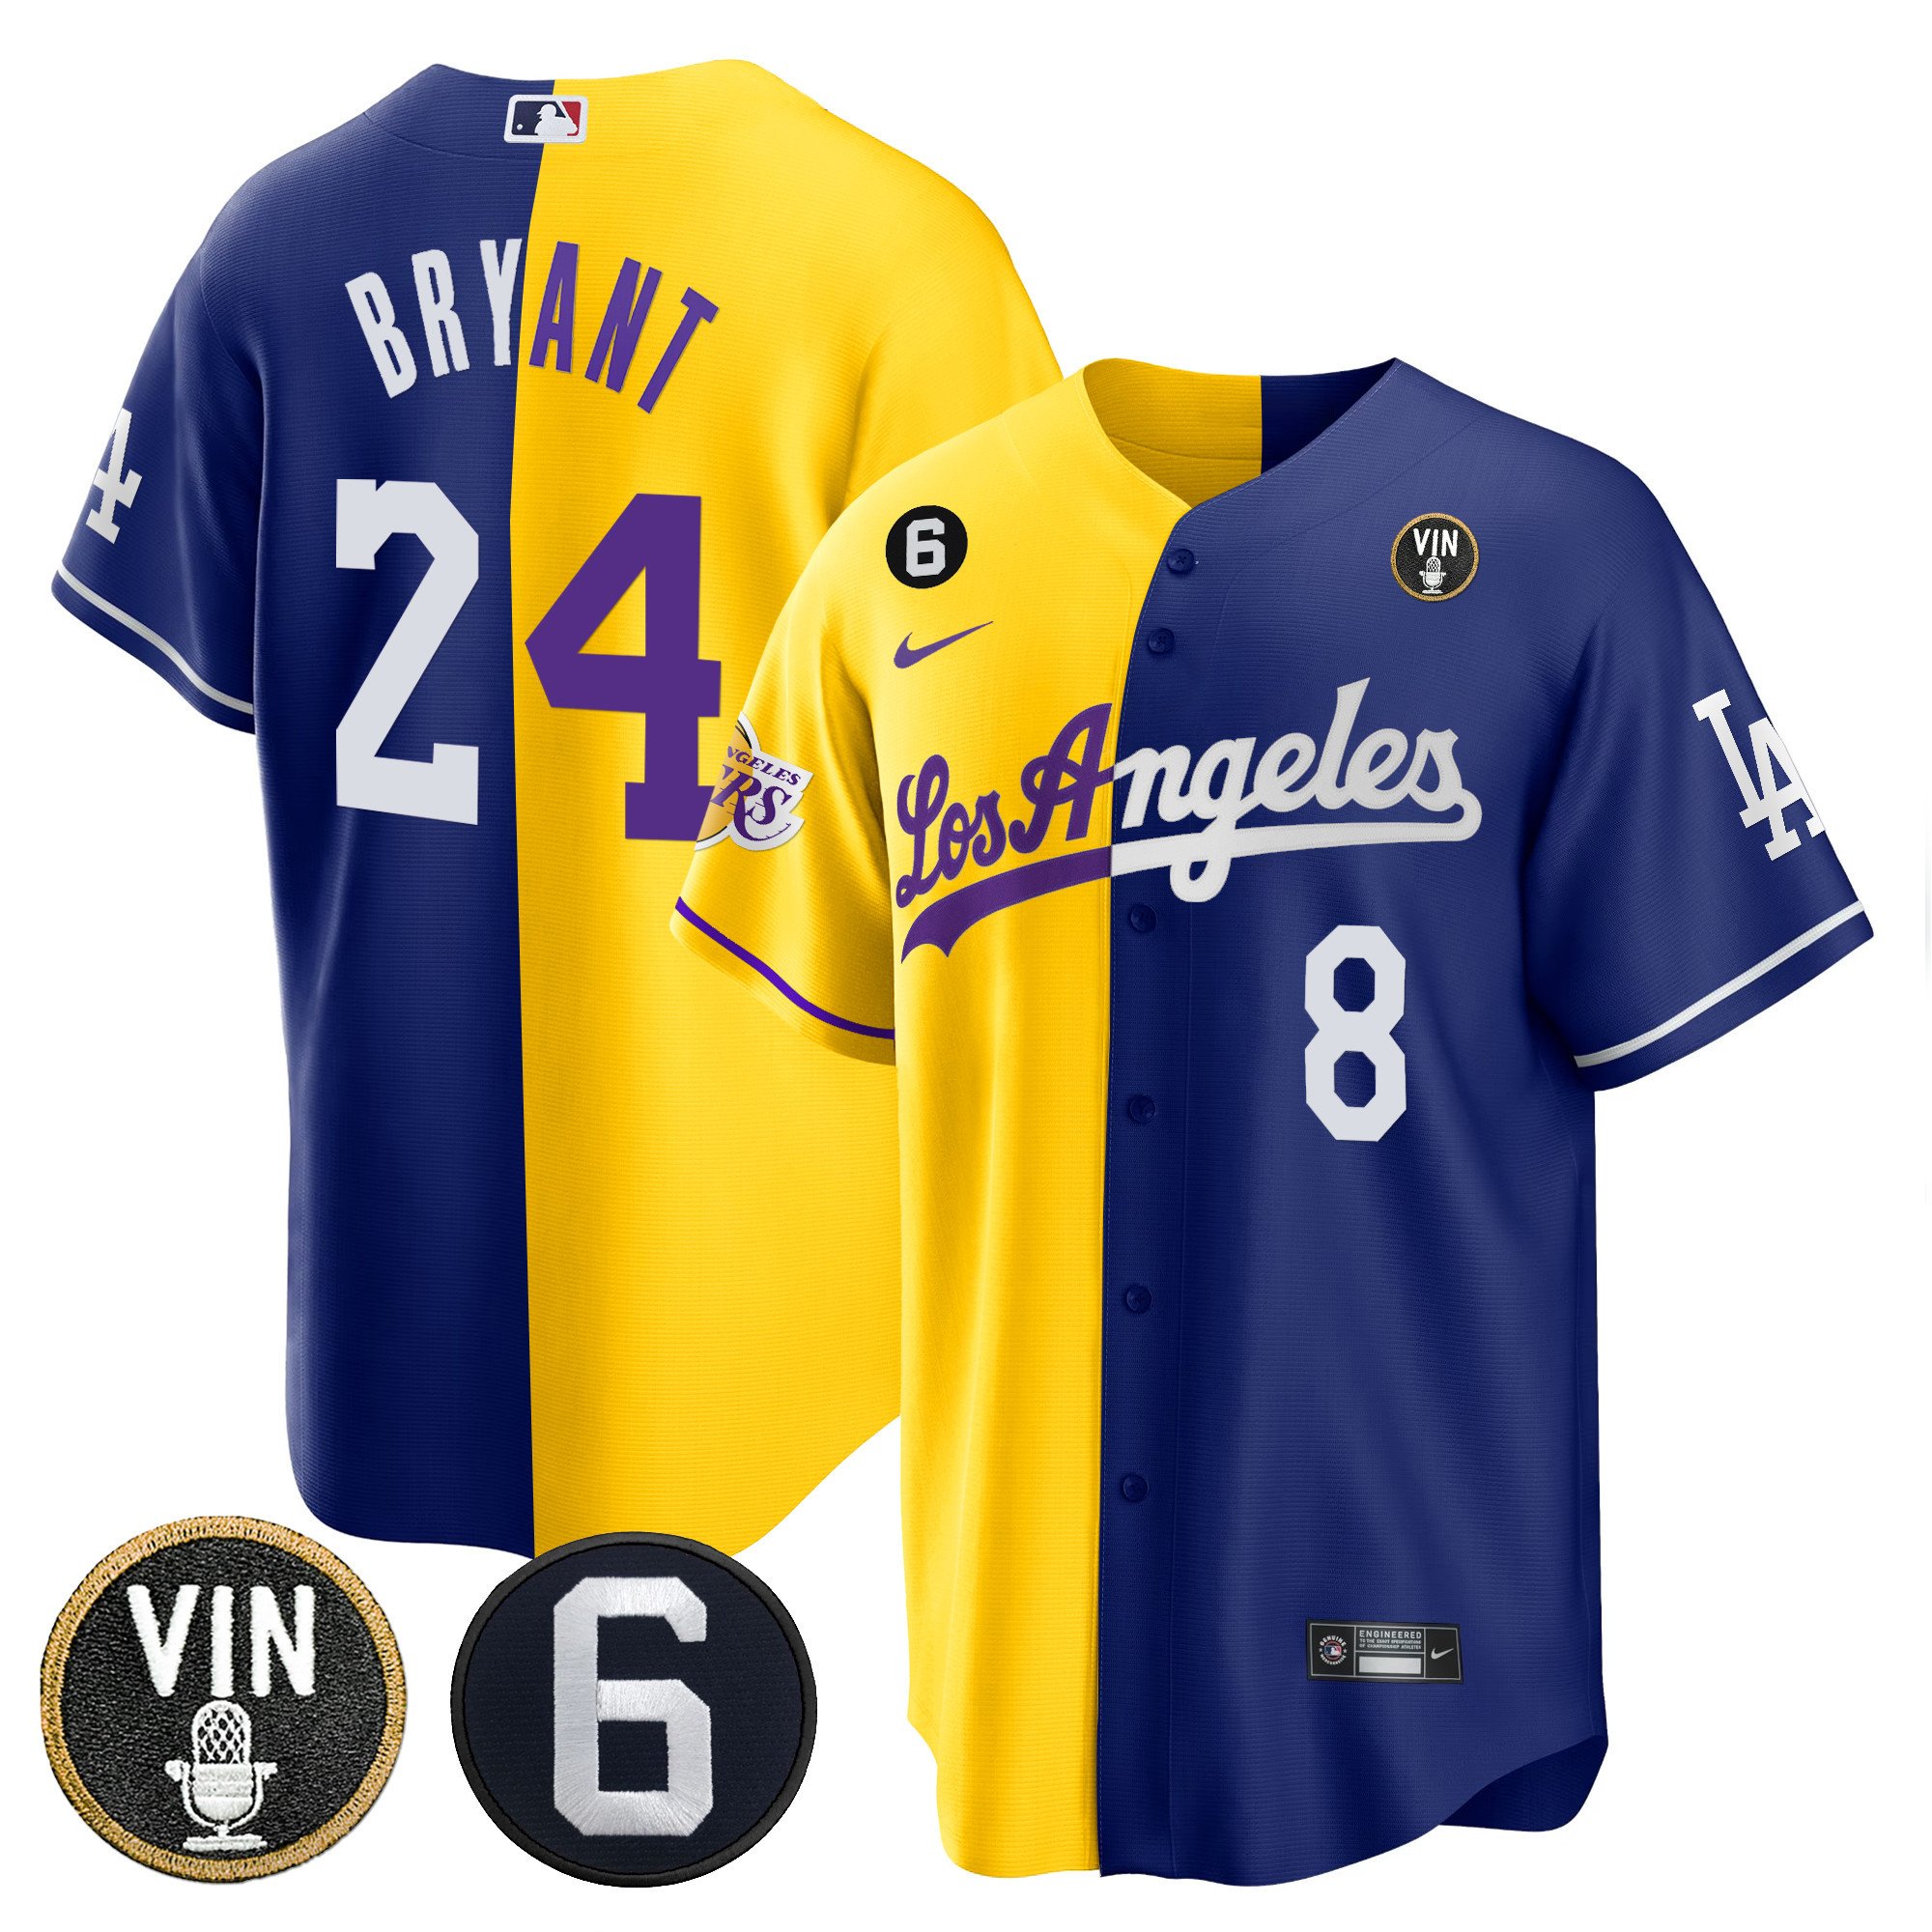 Dodgers Kobe Bryant Jersey authentic special edition for Sale in